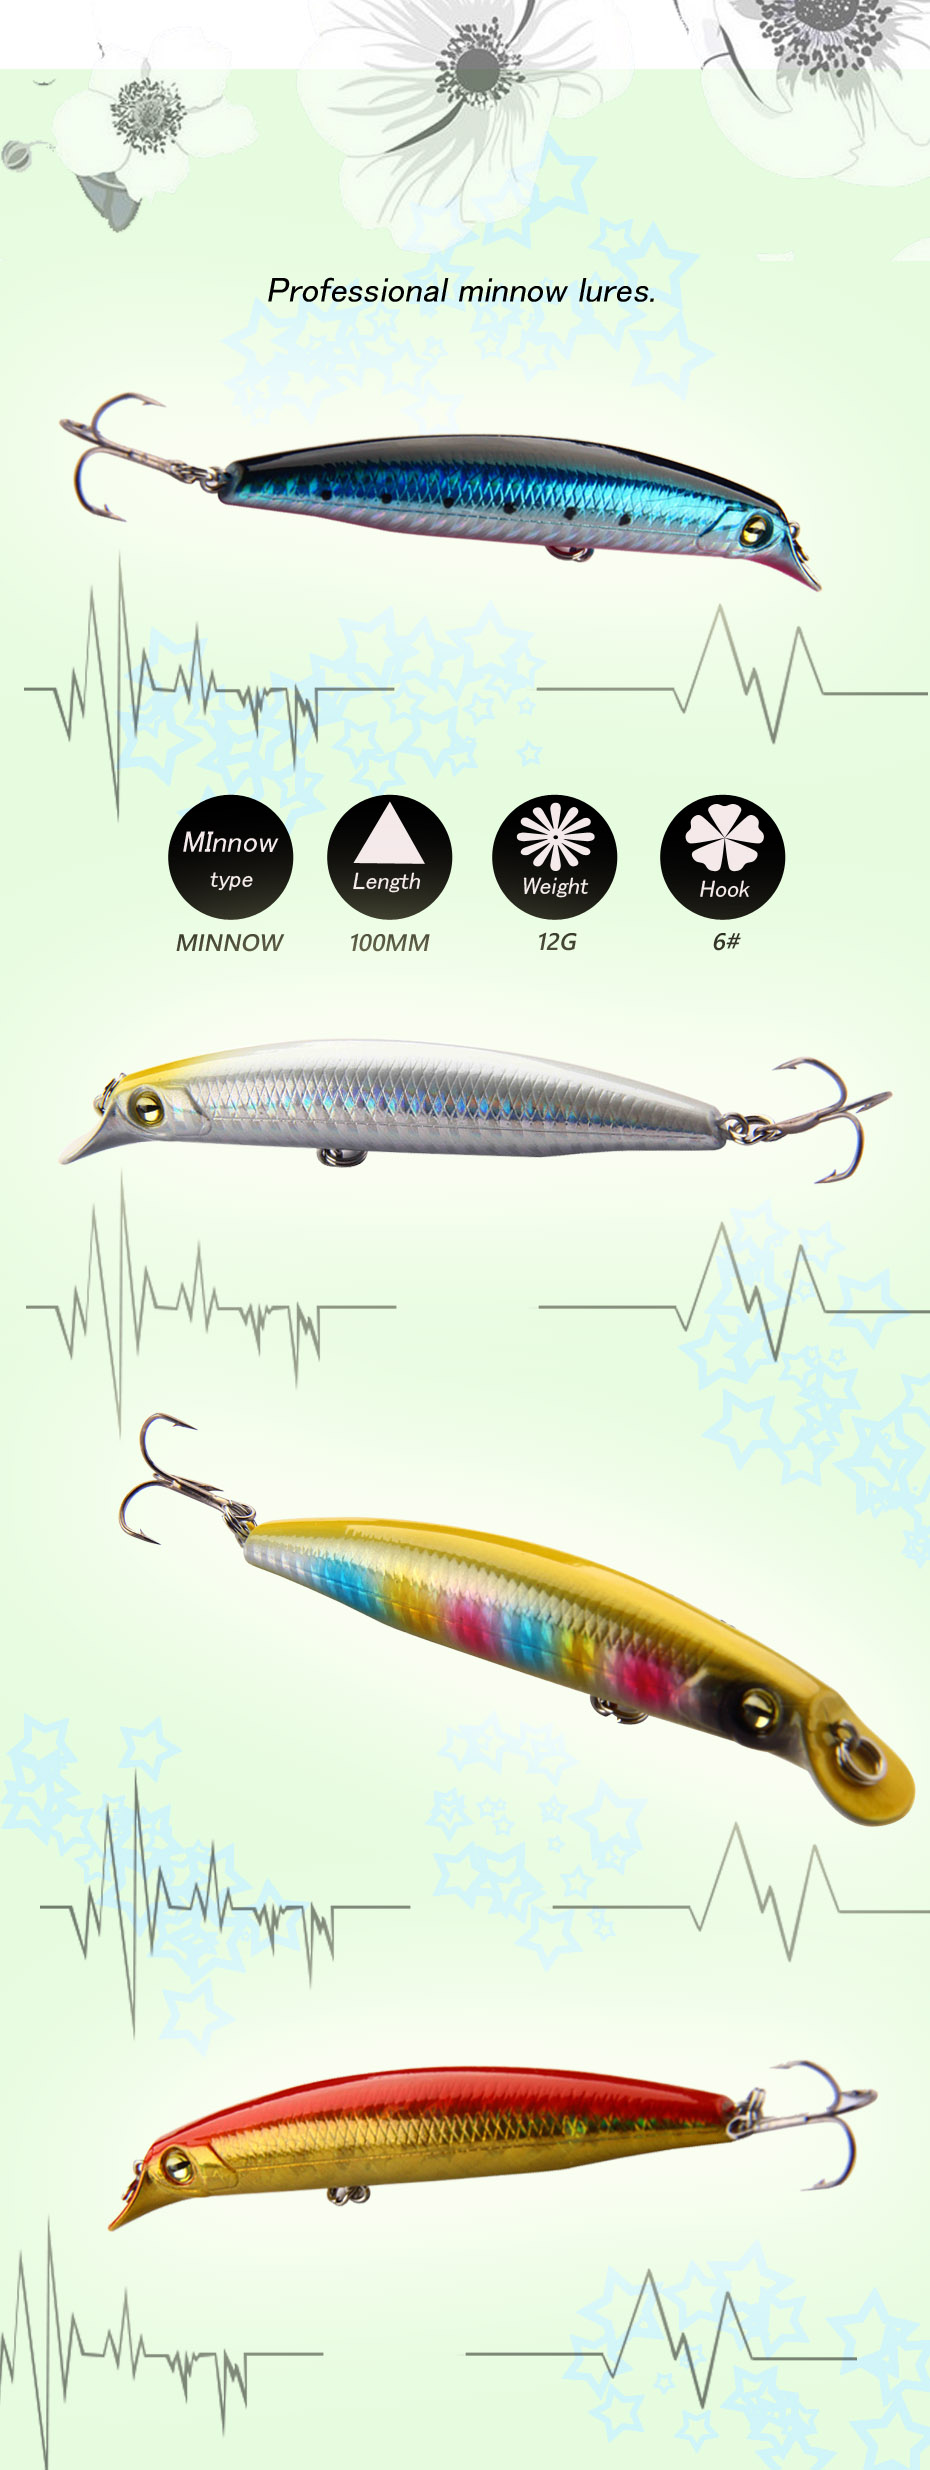 XIN-V -Oem Musky Lures Manufacturer, Minnow Lures For Trout-1